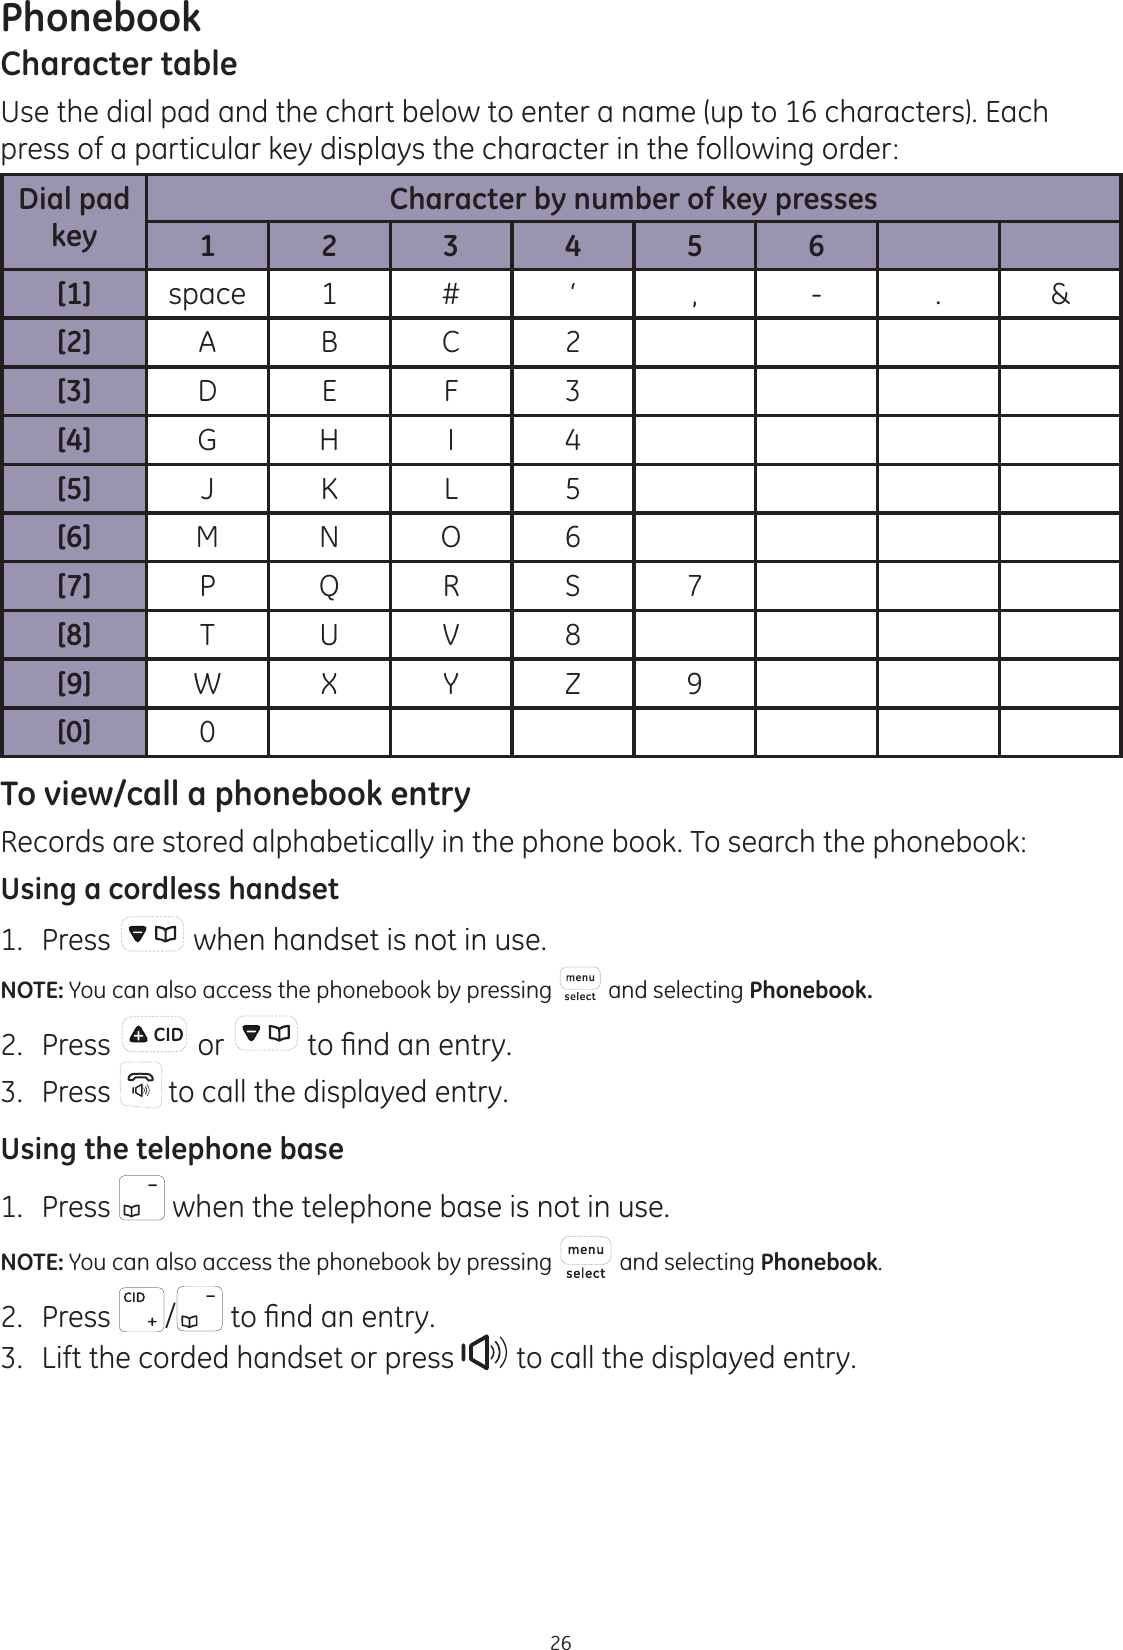 Phonebook26Character tableUse the dial pad and the chart below to enter a name (up to 16 characters). Each press of a particular key displays the character in the following order:Dial pad keyCharacter by number of key presses123456[1] space 1 # ‘ , - . &amp;[2] A B C 2[3] D E F 3[4] G H I 4[5] J K L 5[6] M N O 6[7] P Q R S 7[8] T U V 8[9] W X Y Z 9[0] 0To view/call a phonebook entryRecords are stored alphabetically in the phone book. To search the phonebook:Using a cordless handset1.  Press   when handset is not in use.NOTE: You can also access the phonebook by pressing   and selecting Phonebook.2.  Press   or  WR¿QGDQHQWU\3.  Press   to call the displayed entry. Using the telephone base1.  Press   when the telephone base is not in use.NOTE: You can also access the phonebook by pressing   and selecting Phonebook.2.  Press  / WR¿QGDQHQWU\3.  Lift the corded handset or press   to call the displayed entry.